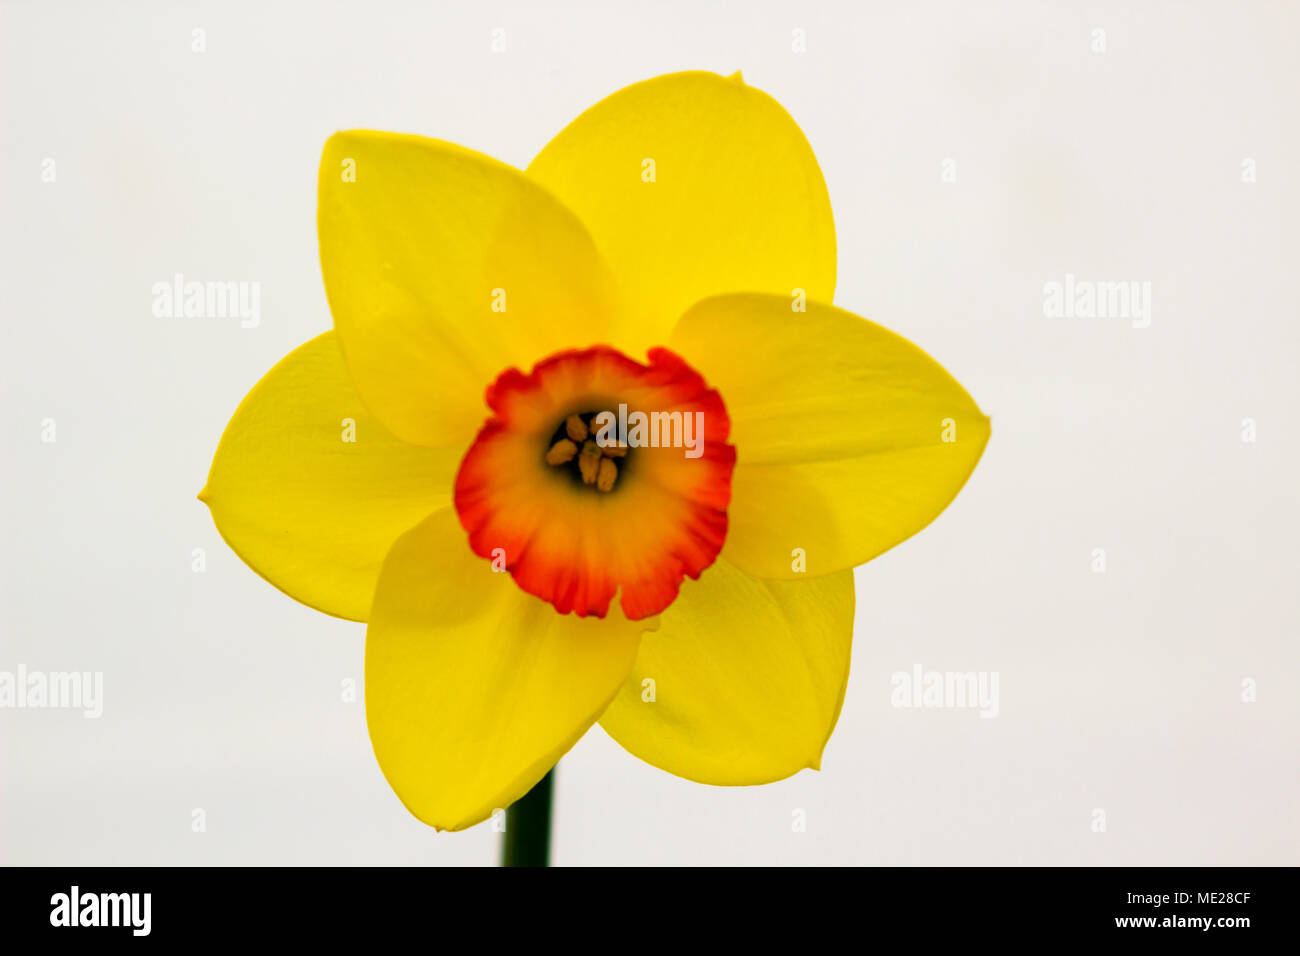 A single daffodil bloom on display at the annual Spring Festival held in Barnett's Demesne Belfast  Northern Ireland Stock Photo